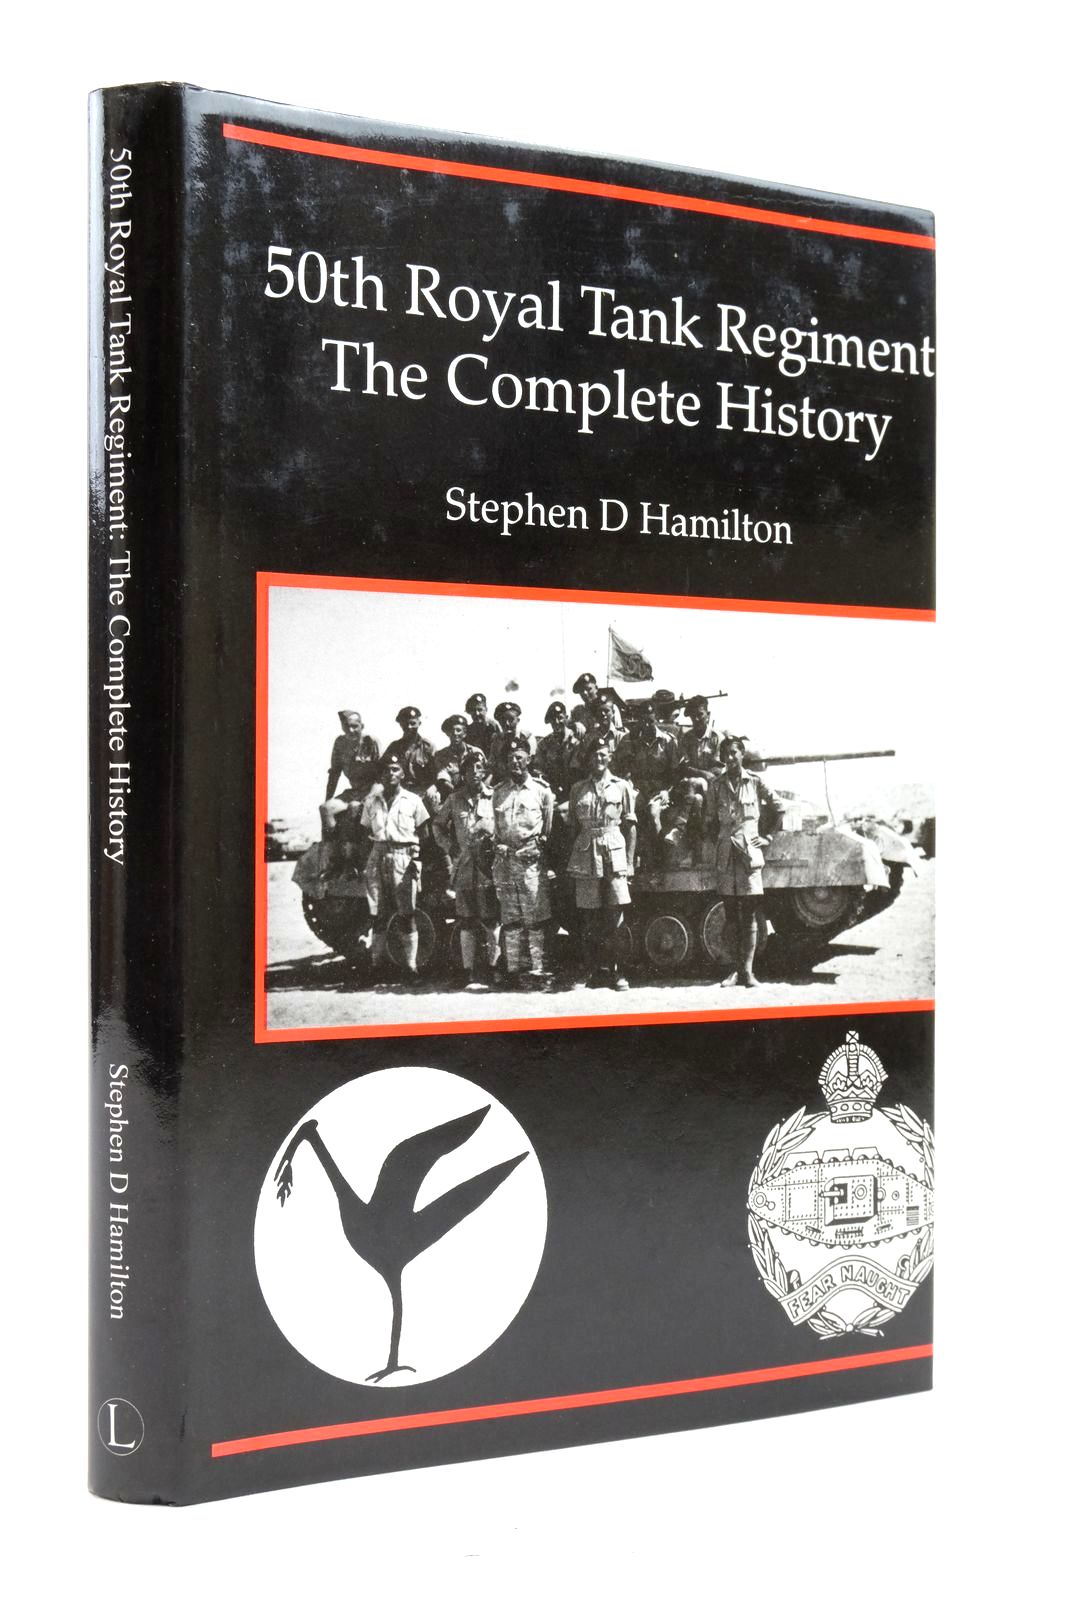 Photo of 50TH ROYAL TANK REGIMENT: THE COMPLETE HISTORY written by Hamilton, Stephen D. published by Lutterworth Press (STOCK CODE: 2138078)  for sale by Stella & Rose's Books